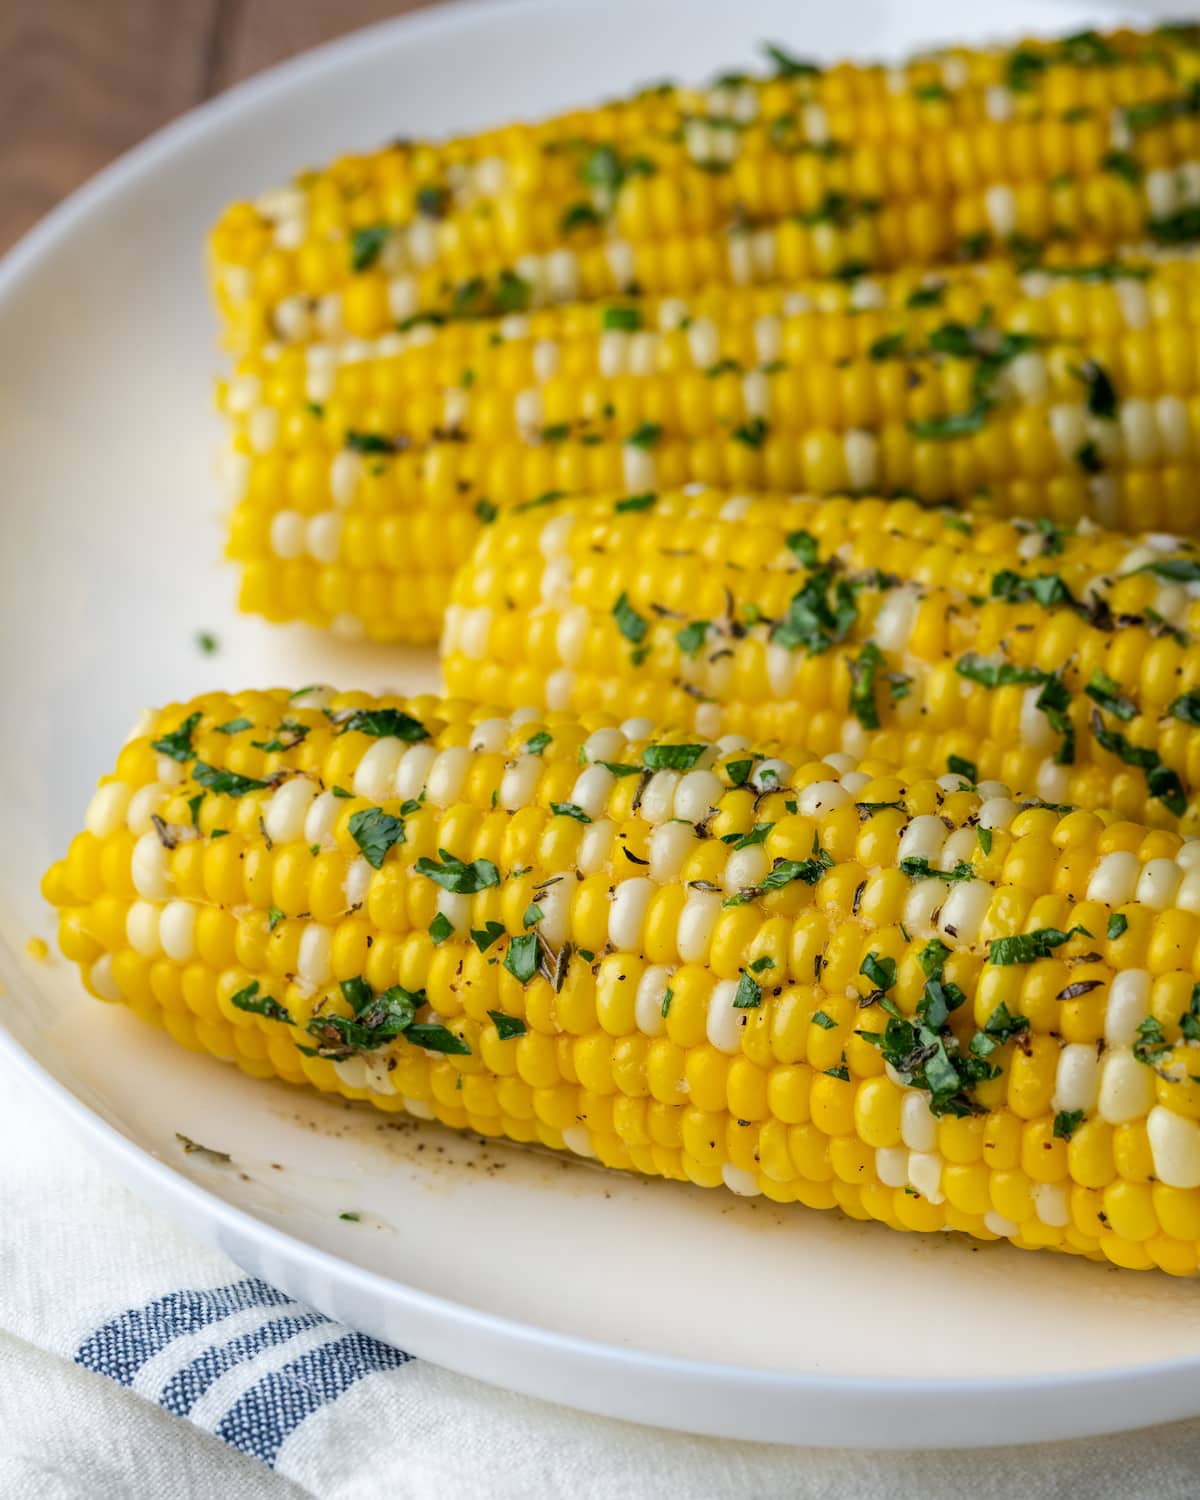 Corn on the cob coated with herb butter on a white plate.